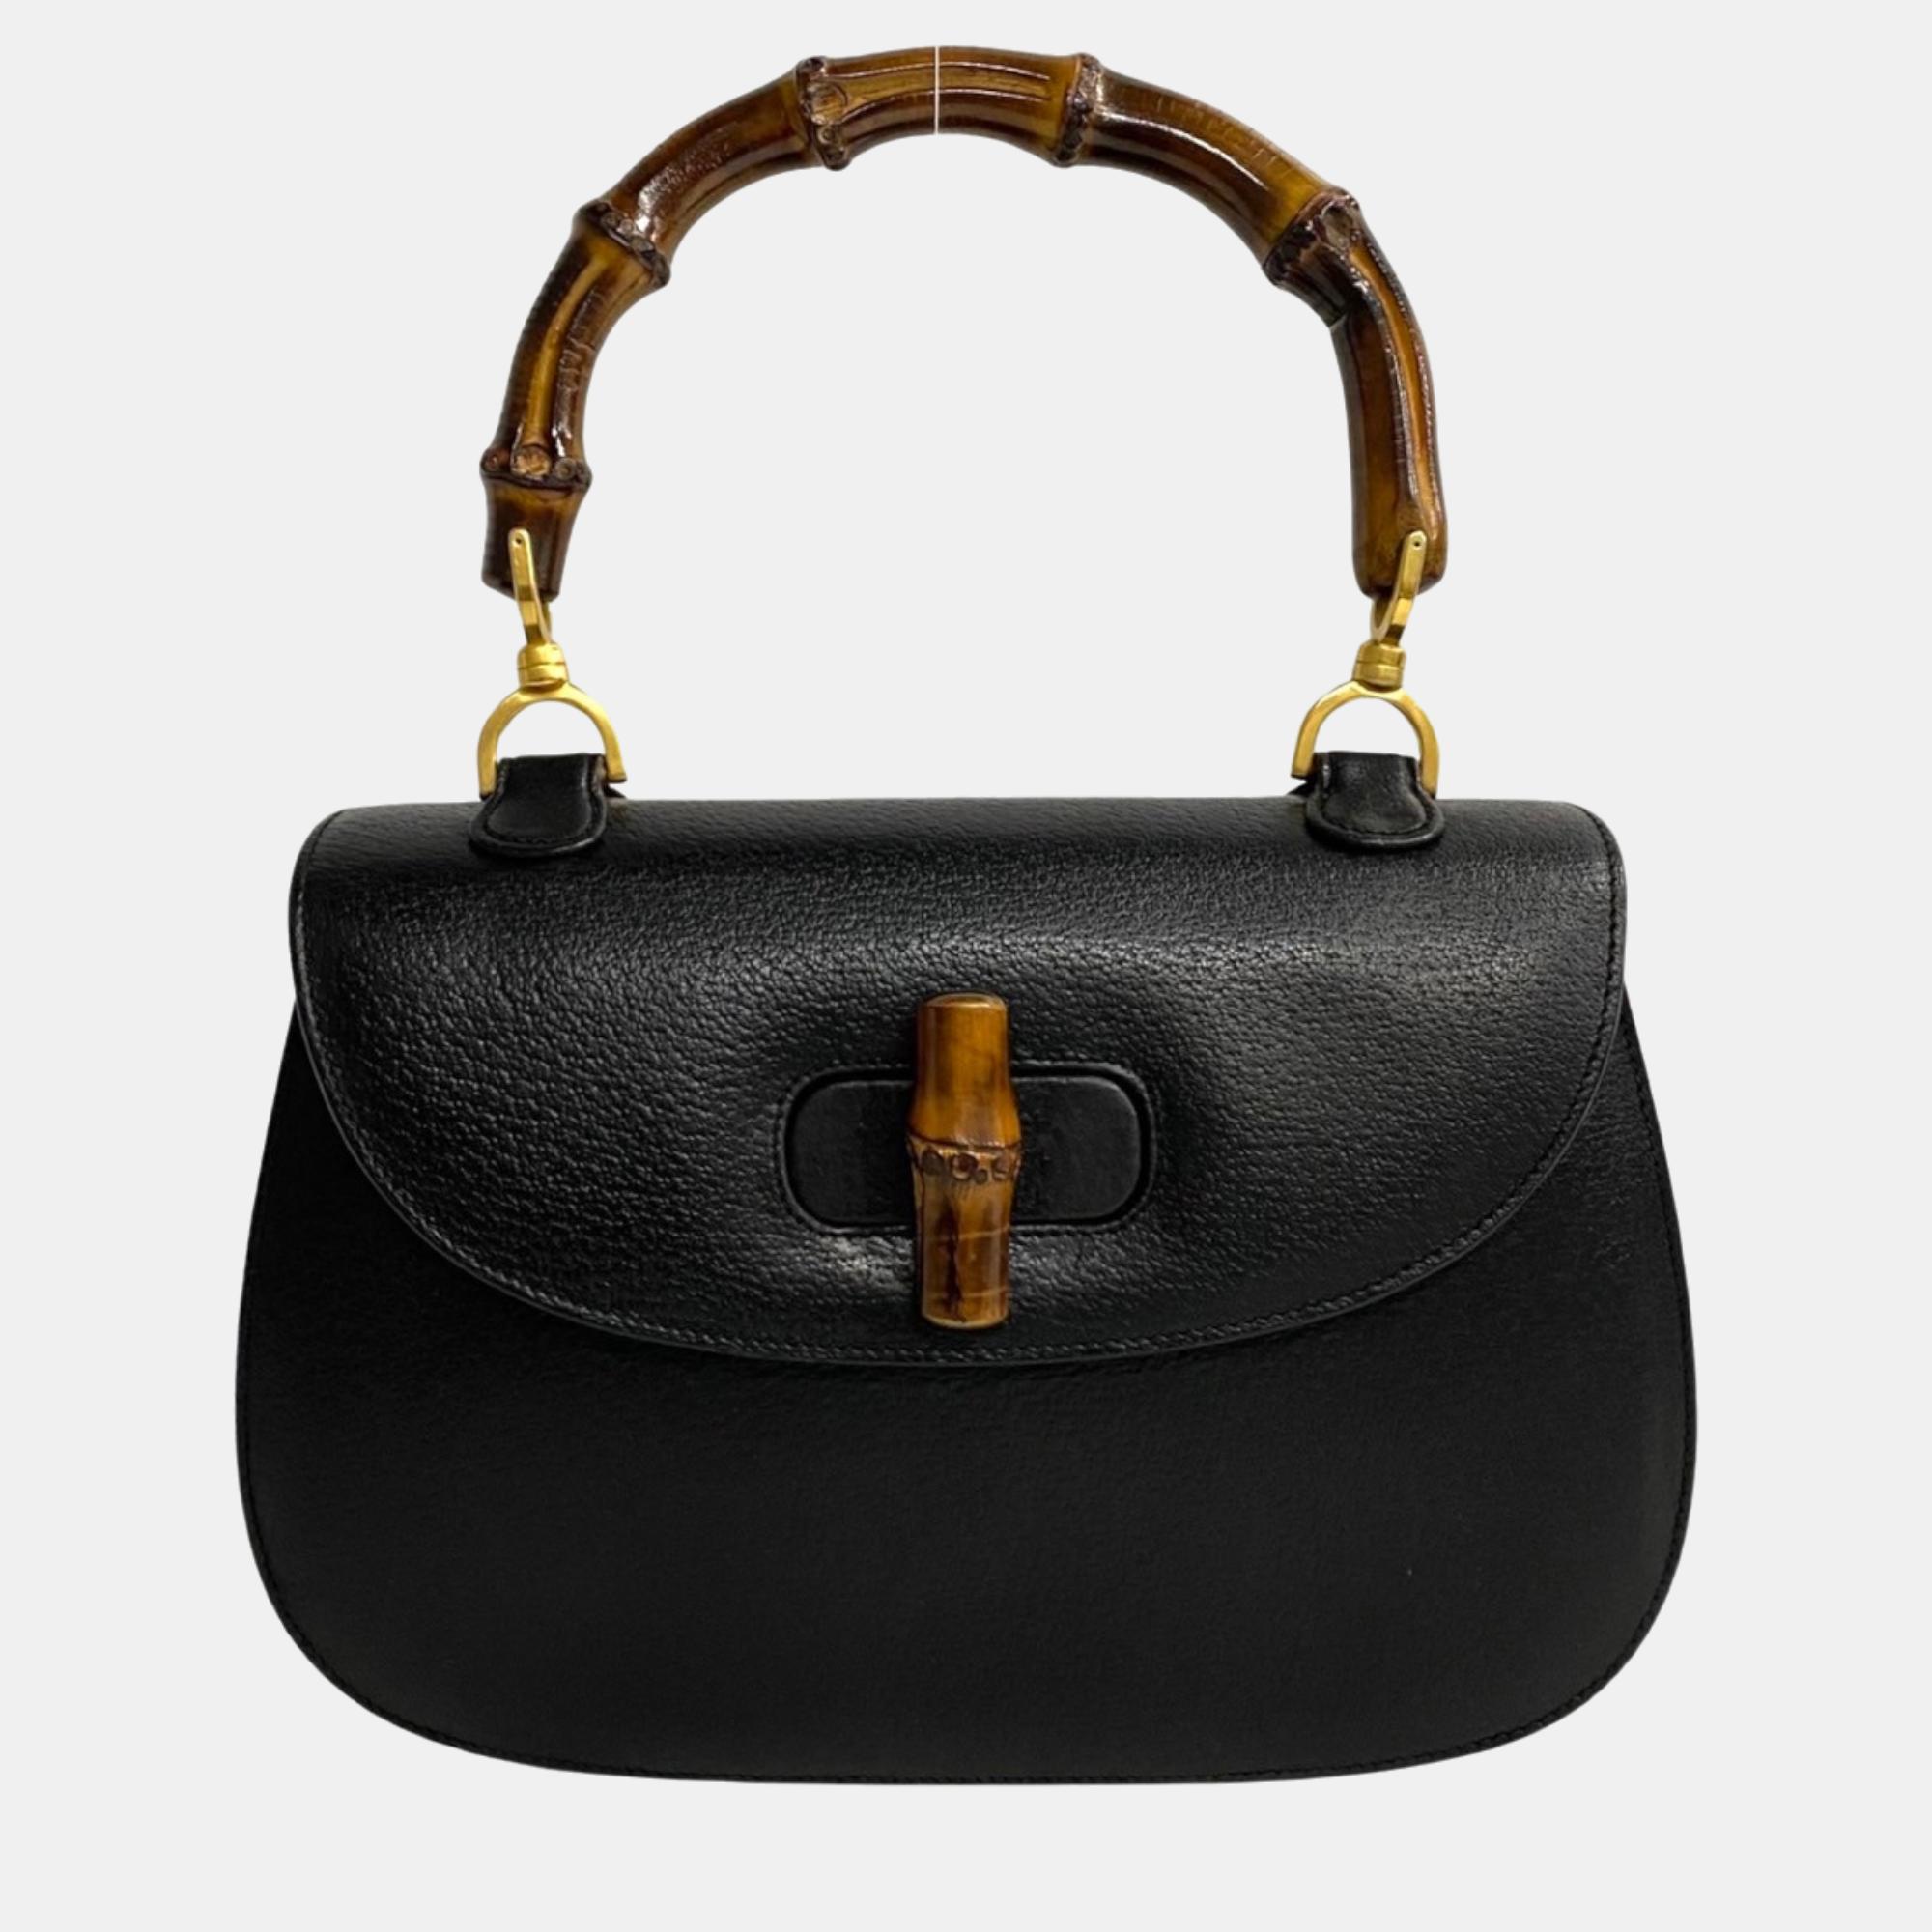 Gucci black leather bamboo top handle bag